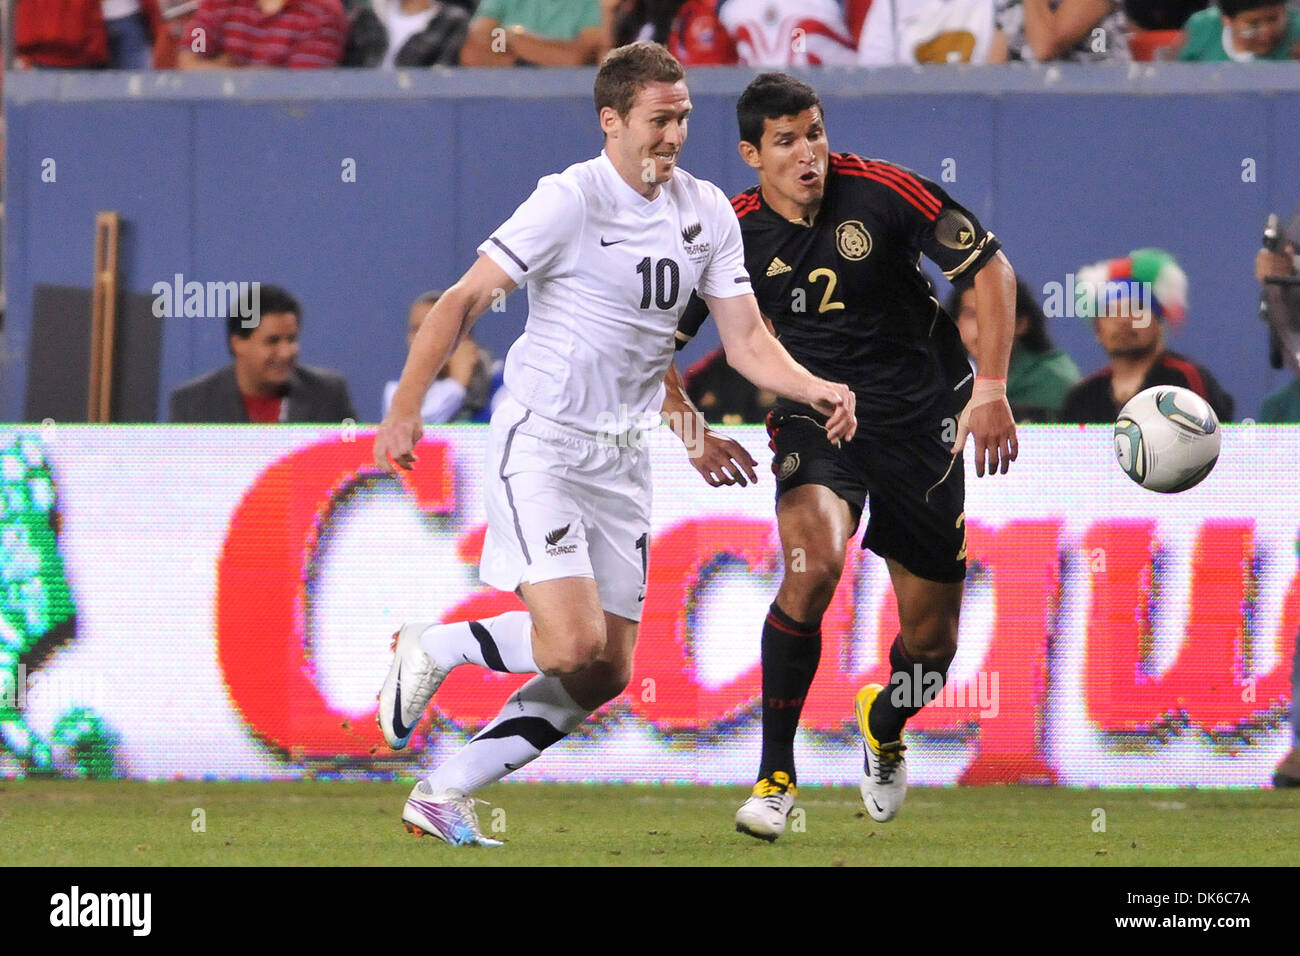 June 1, 2011 - Denver, Colorado, United States of America - Mexico's Francisco Rodriguez (2) and New Zealands Chris Killen (10) run for the ball at Invesco Field at Mile High. Mexico defeated New Zealand 3-0 (Credit Image: © Michael Furman/Southcreek Global/ZUMAPRESS.com) Stock Photo